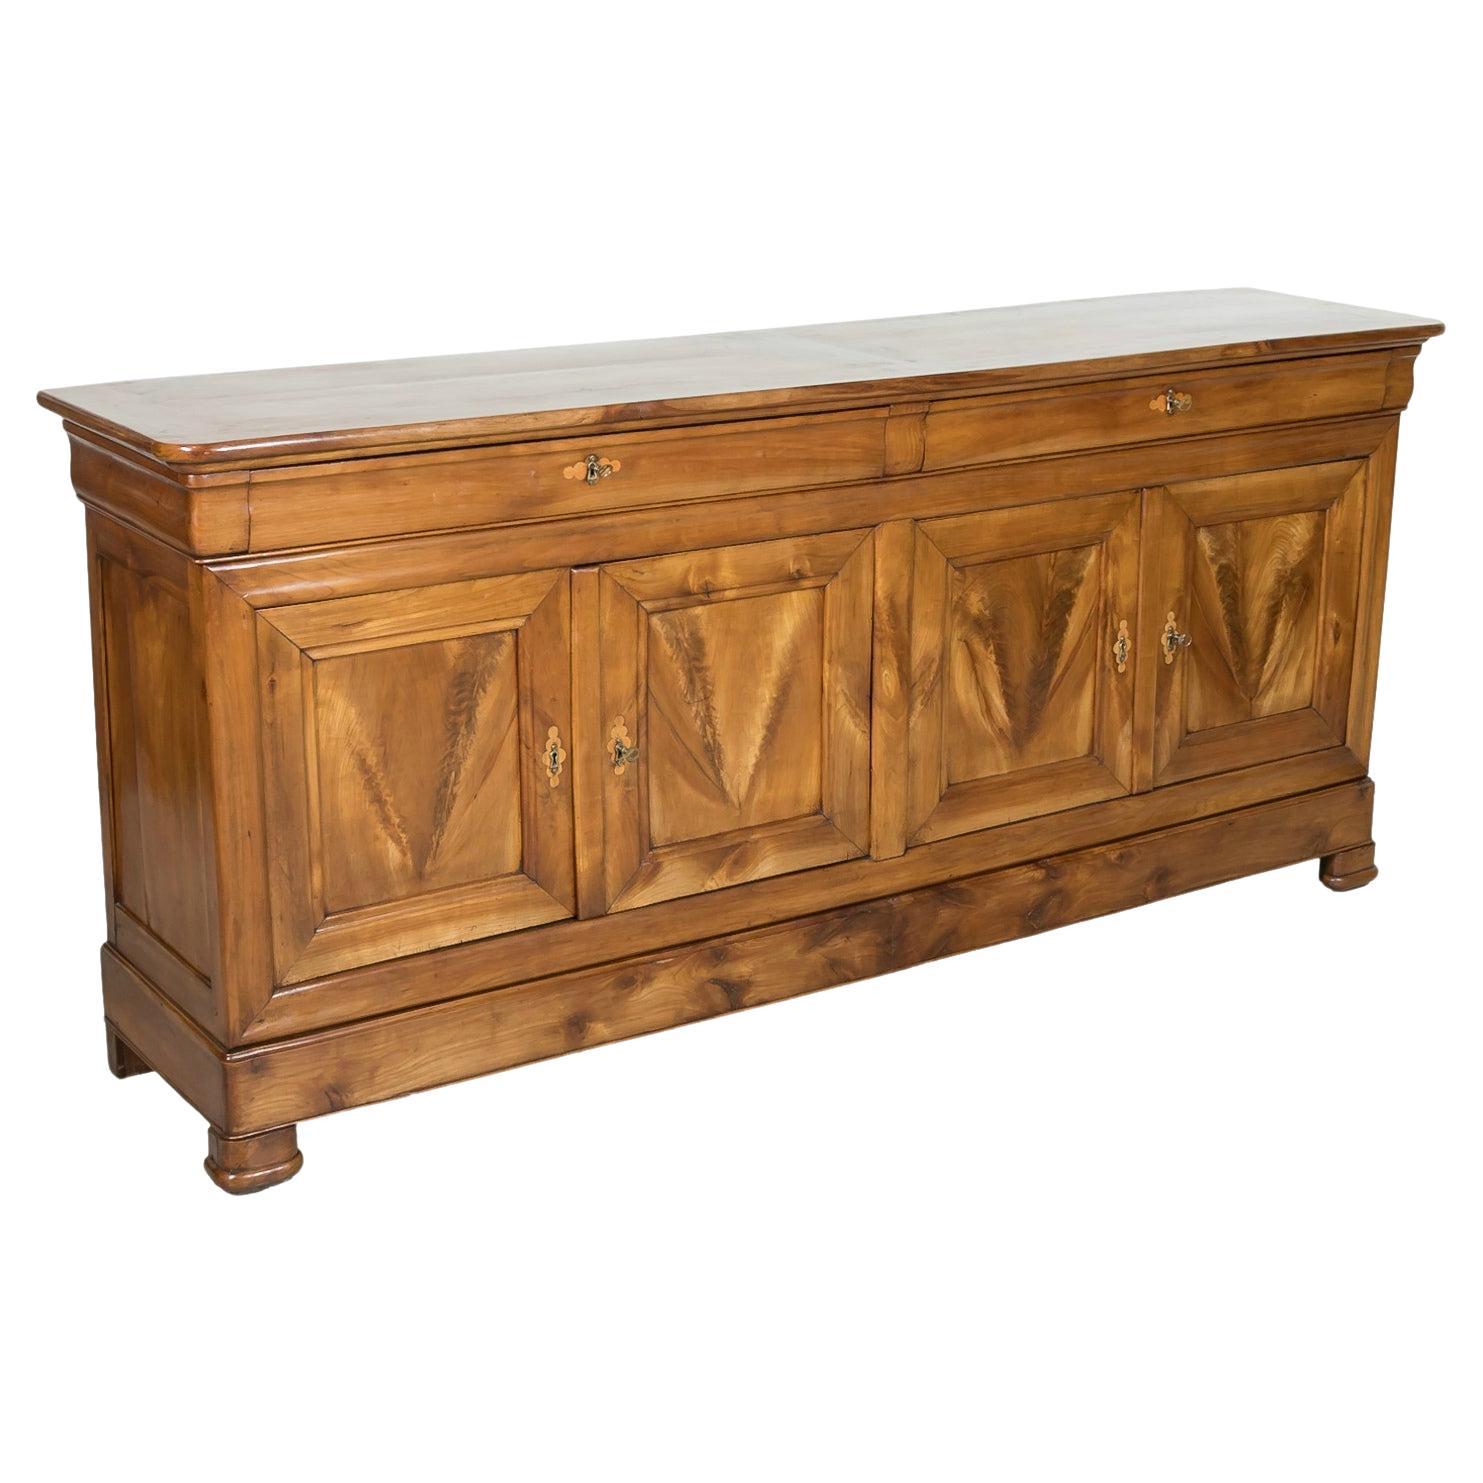 19th Century French Louis Philippe Period Four-Door Cherry Wood Enfilade Buffet